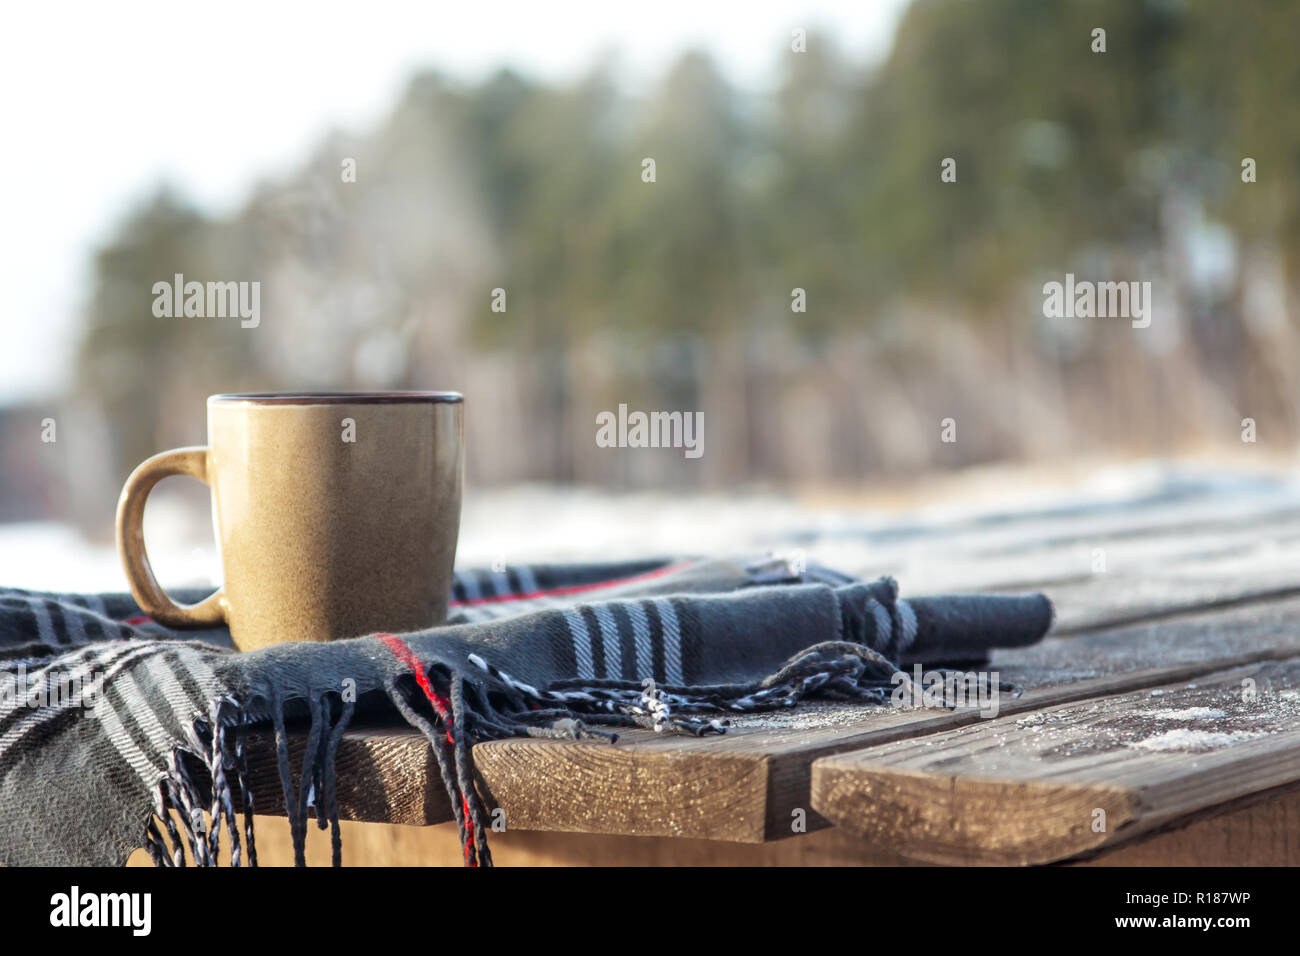 https://c8.alamy.com/comp/R187WP/steaming-cup-of-hot-coffee-or-tea-standing-on-the-outdoor-wooden-table-in-snowy-winter-day-winter-weekend-or-holidays-healthy-activities-outdoor-con-R187WP.jpg